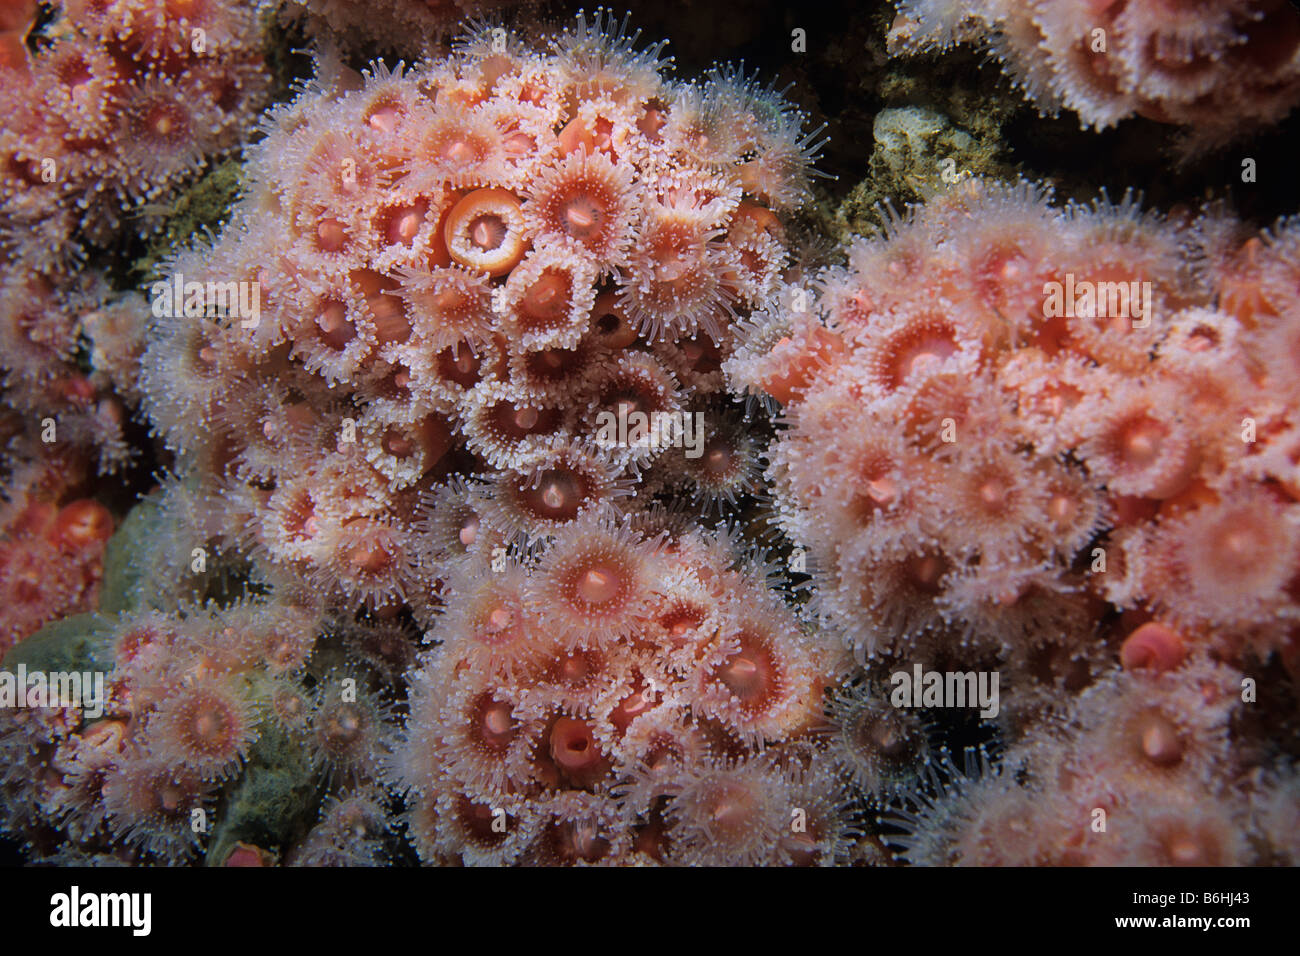 Colony of Strawberry anemone or club-tipped anemone (Corynactis californica) on artificial reef, California, USA. Stock Photo